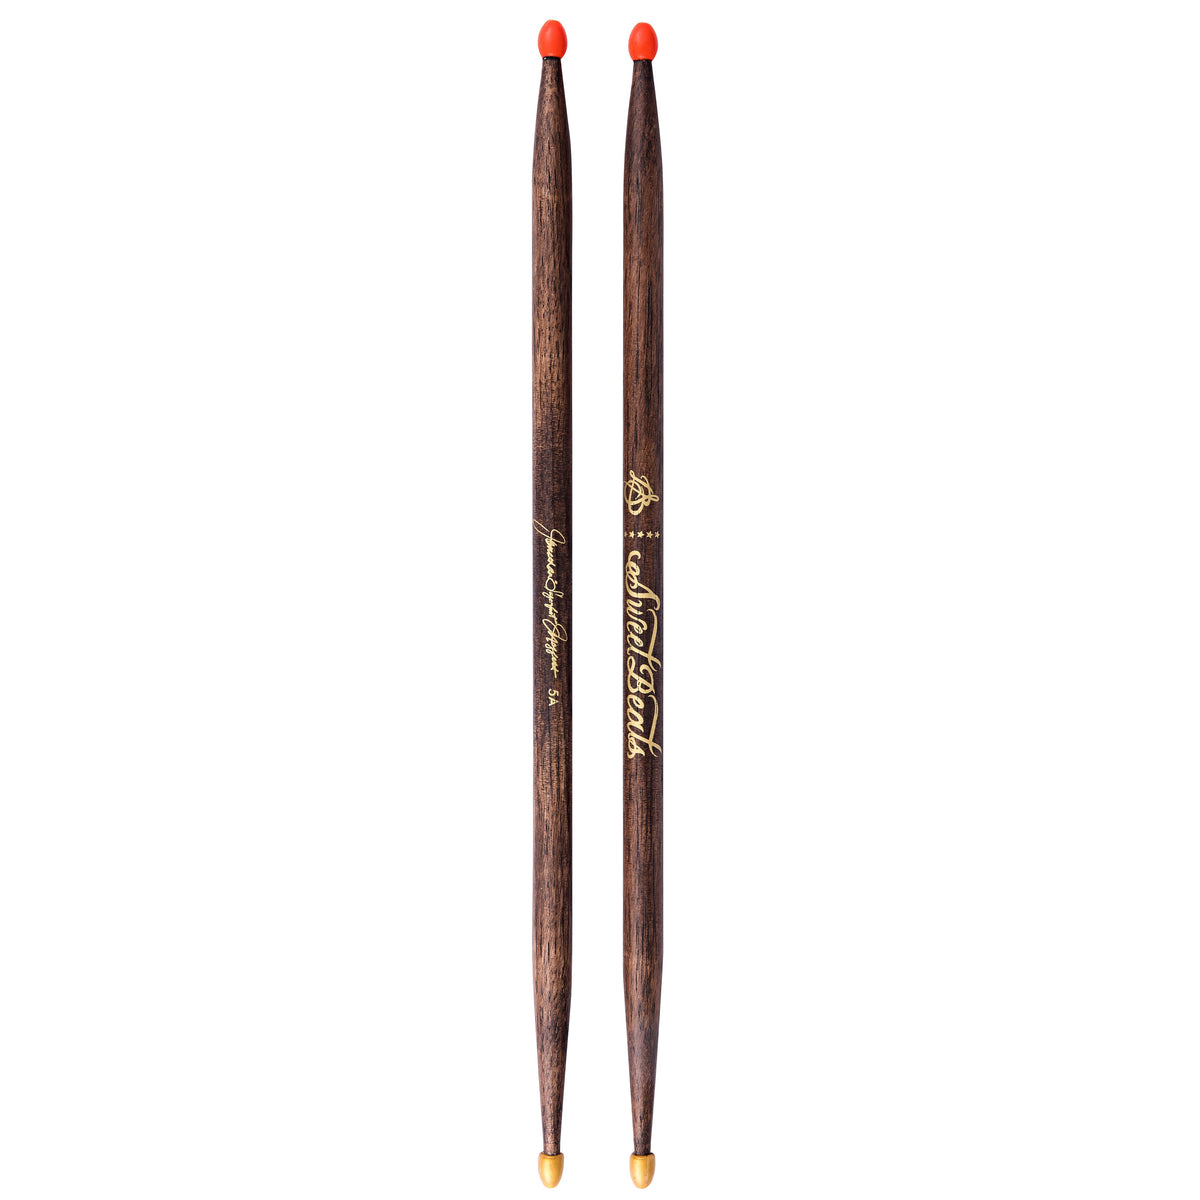 SweetBeats Drum Sticks - Sweet Hickory Espresso Stained Wood | Nylon Tips